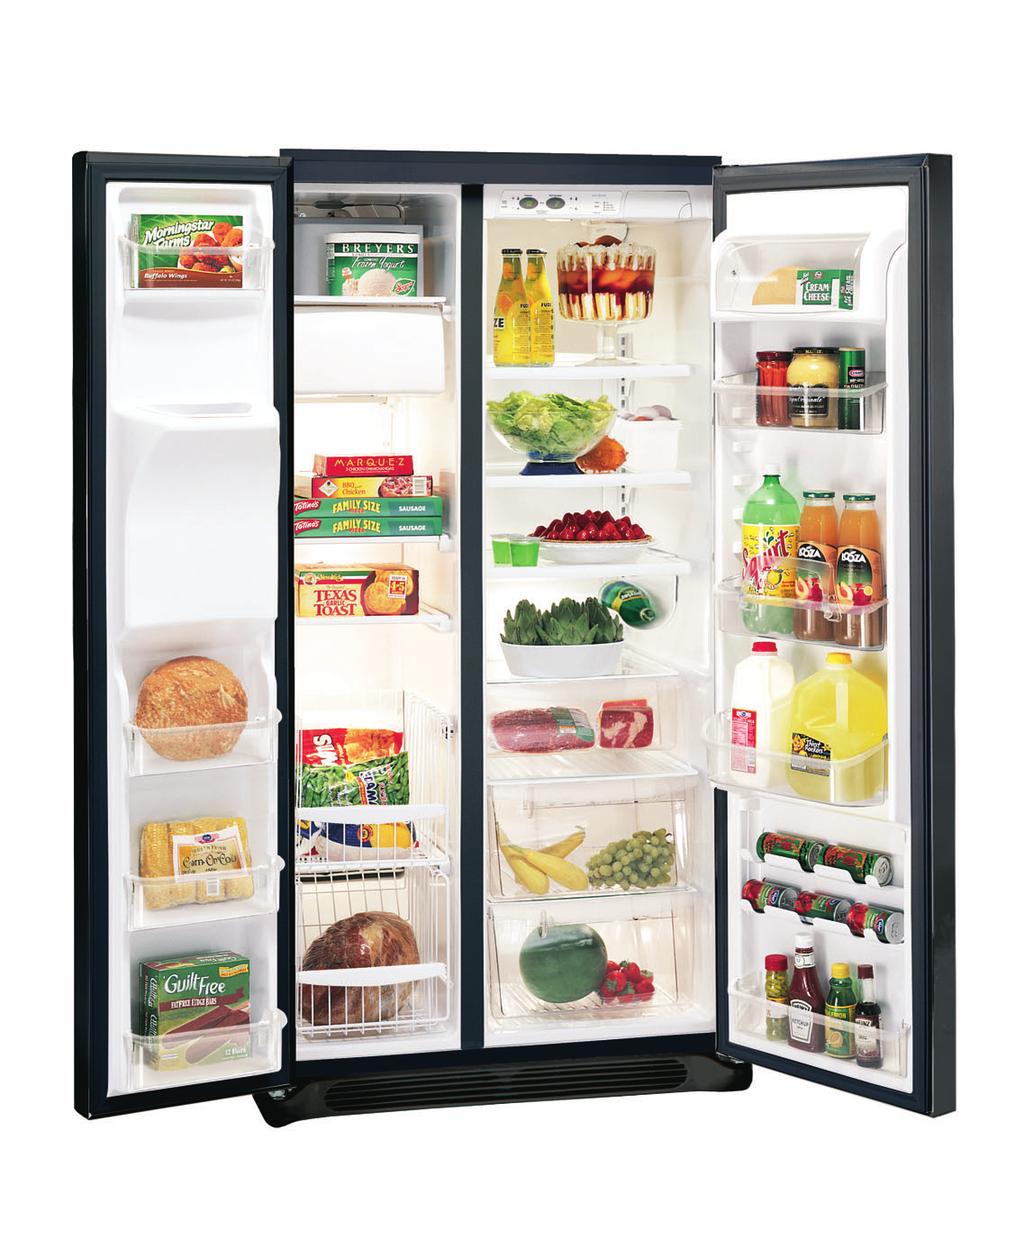 AdvanceTech 60cm Counter Depth Side-by-Side Refrigerators MRVC25V9D(S) (220-240V, 50/60Hz 60cm Counter Depth Easy-Clean Stainless Steel Doors with Black Cabinet Easy-to-Use Electronic Temperature